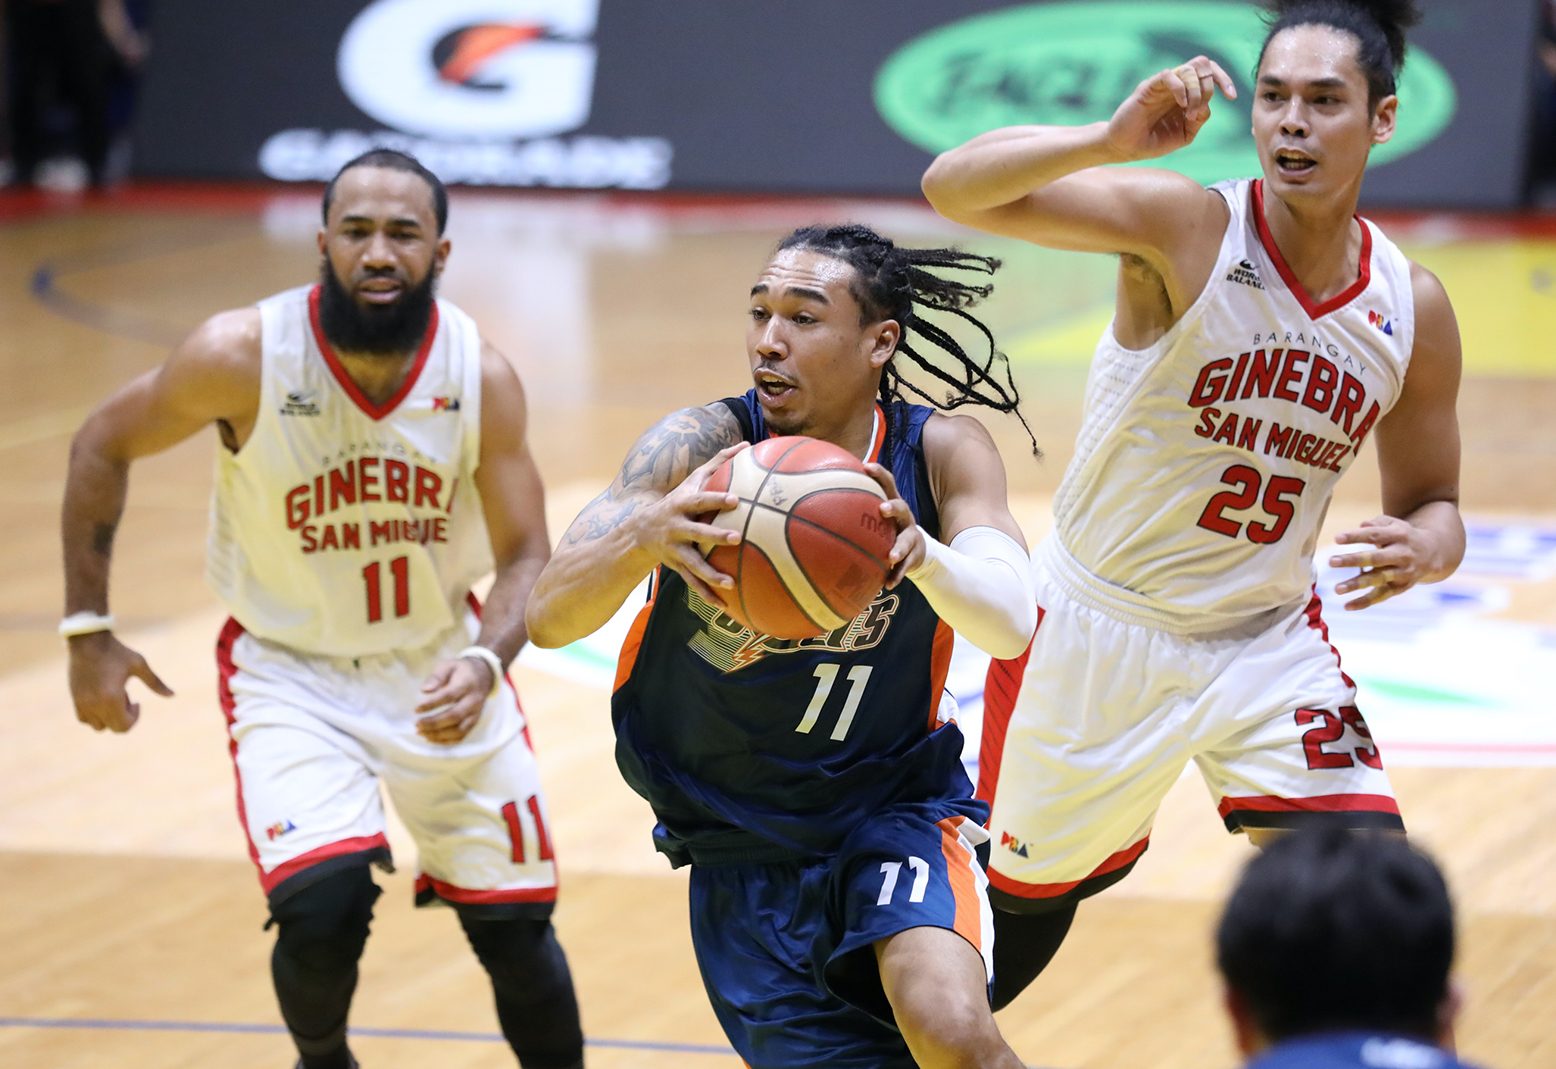 Decade in the making: Newsome inches closer to Gilas Pilipinas goal